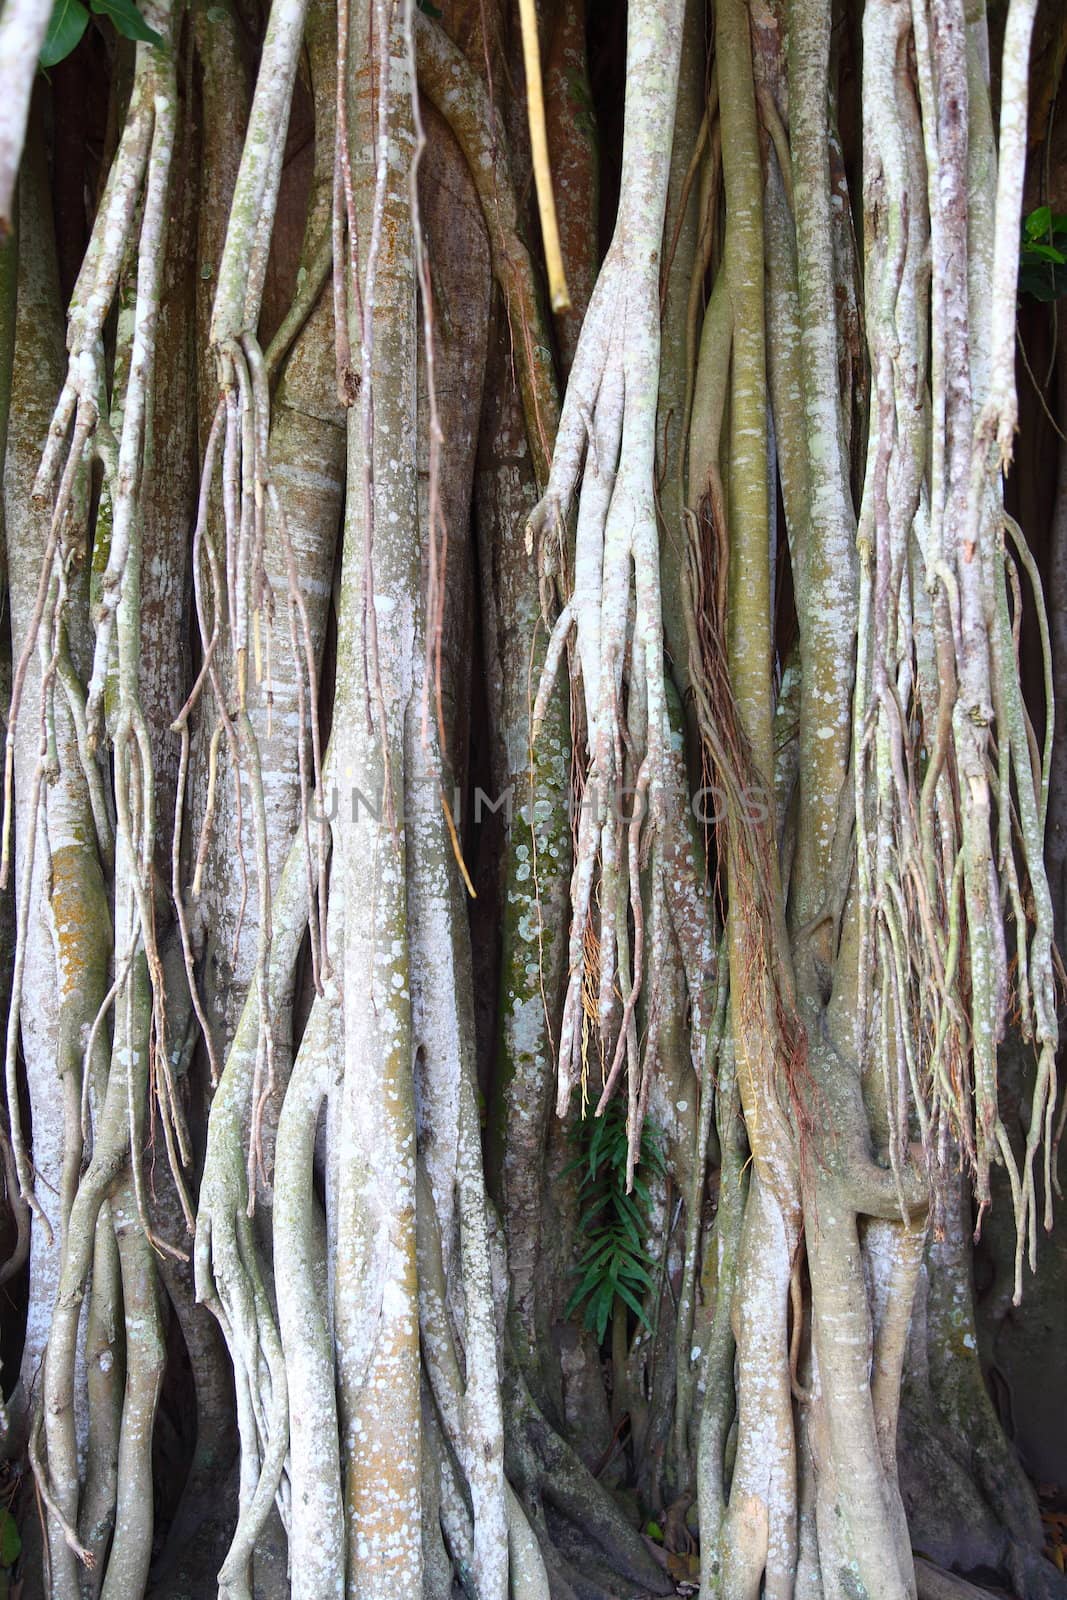 Banyan tree which grows near Mendut lifetime with the temple itself, as usual telltales swings for children